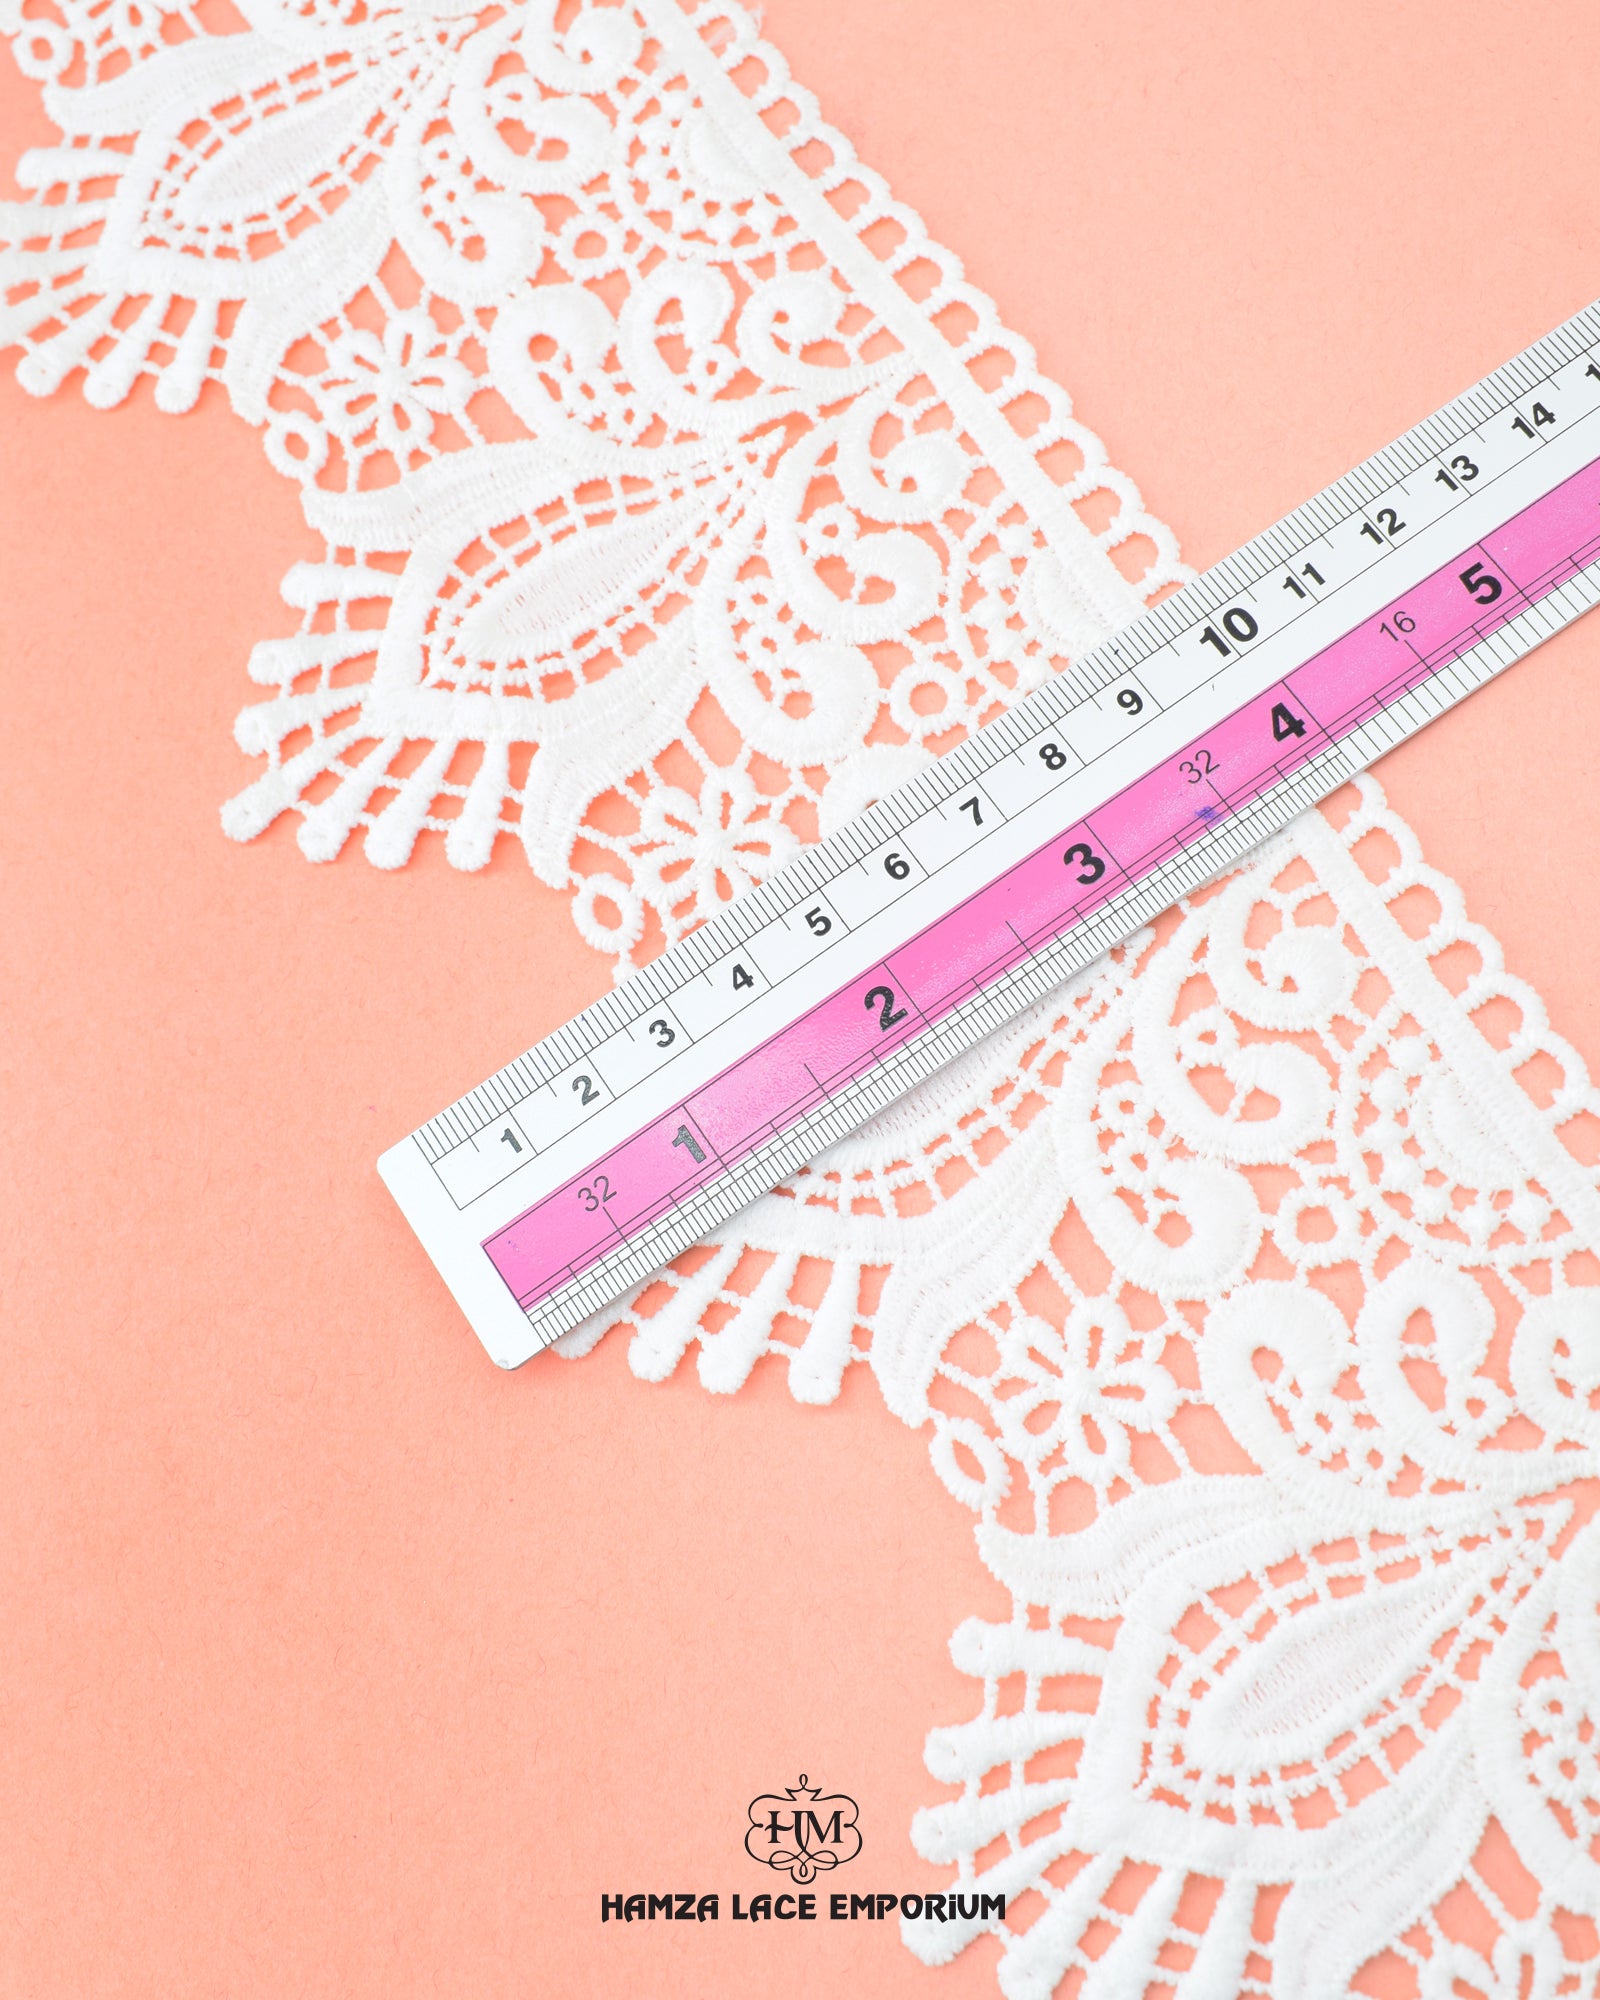 The size of the 'Edging Lace 23021' is given with the help of a ruler.